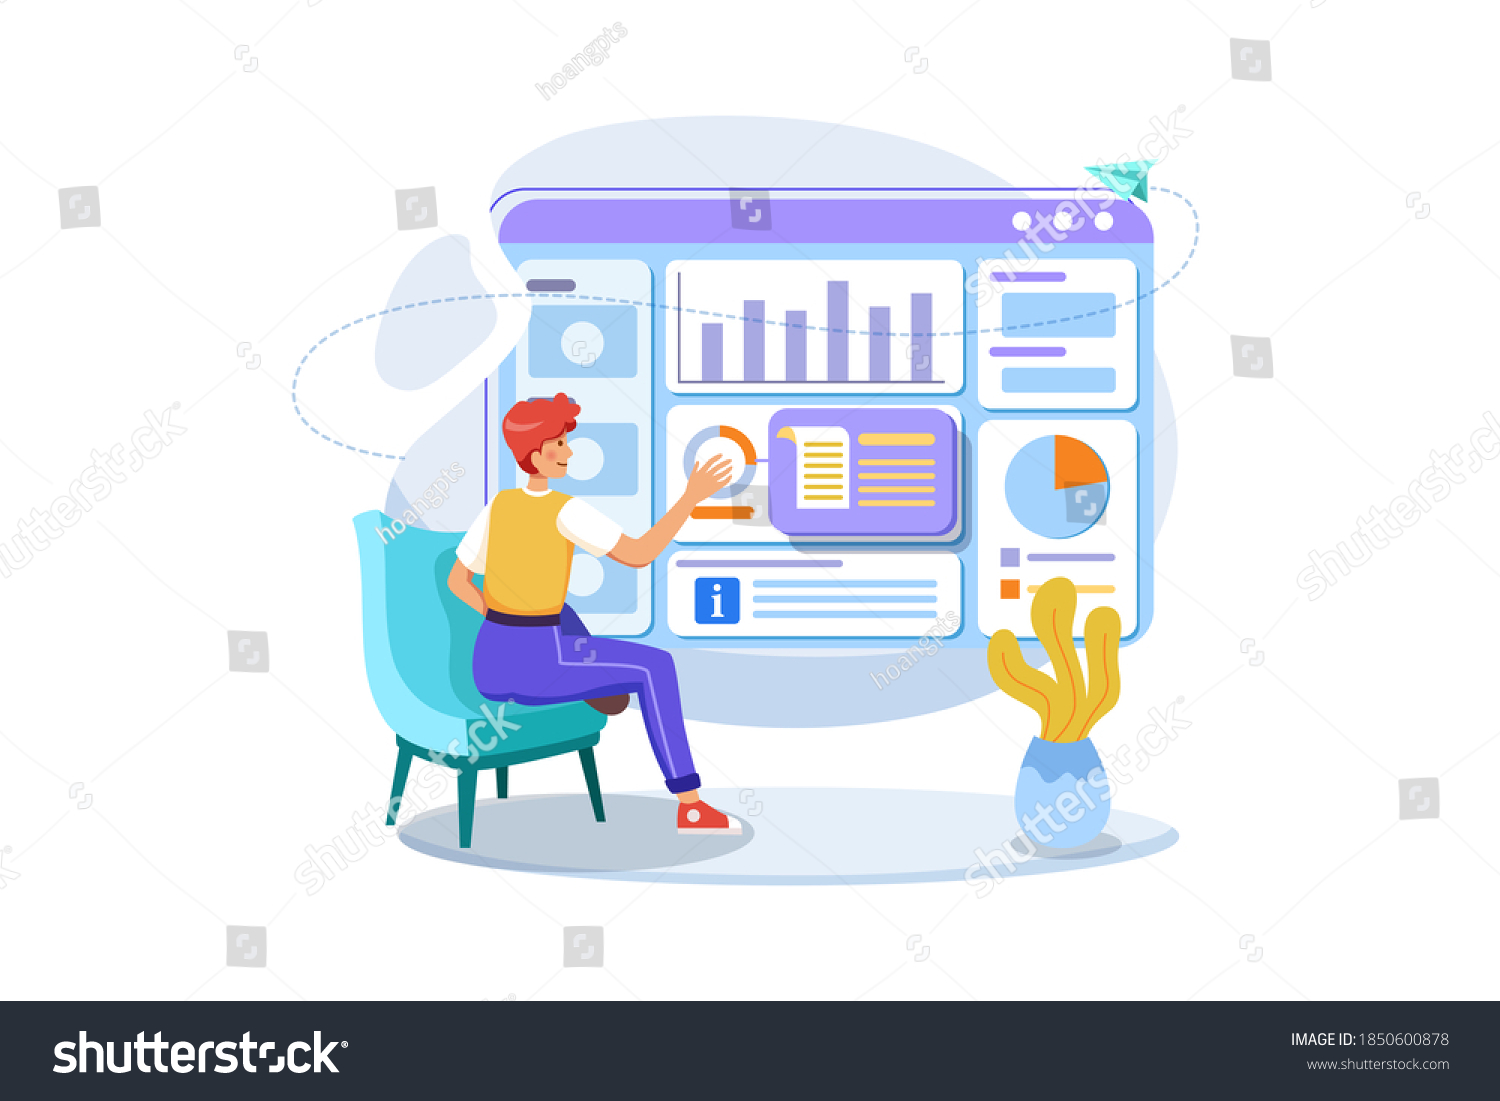 SVG of Manager analyzing reports and infographic. Flat illustration isolated on white background. svg